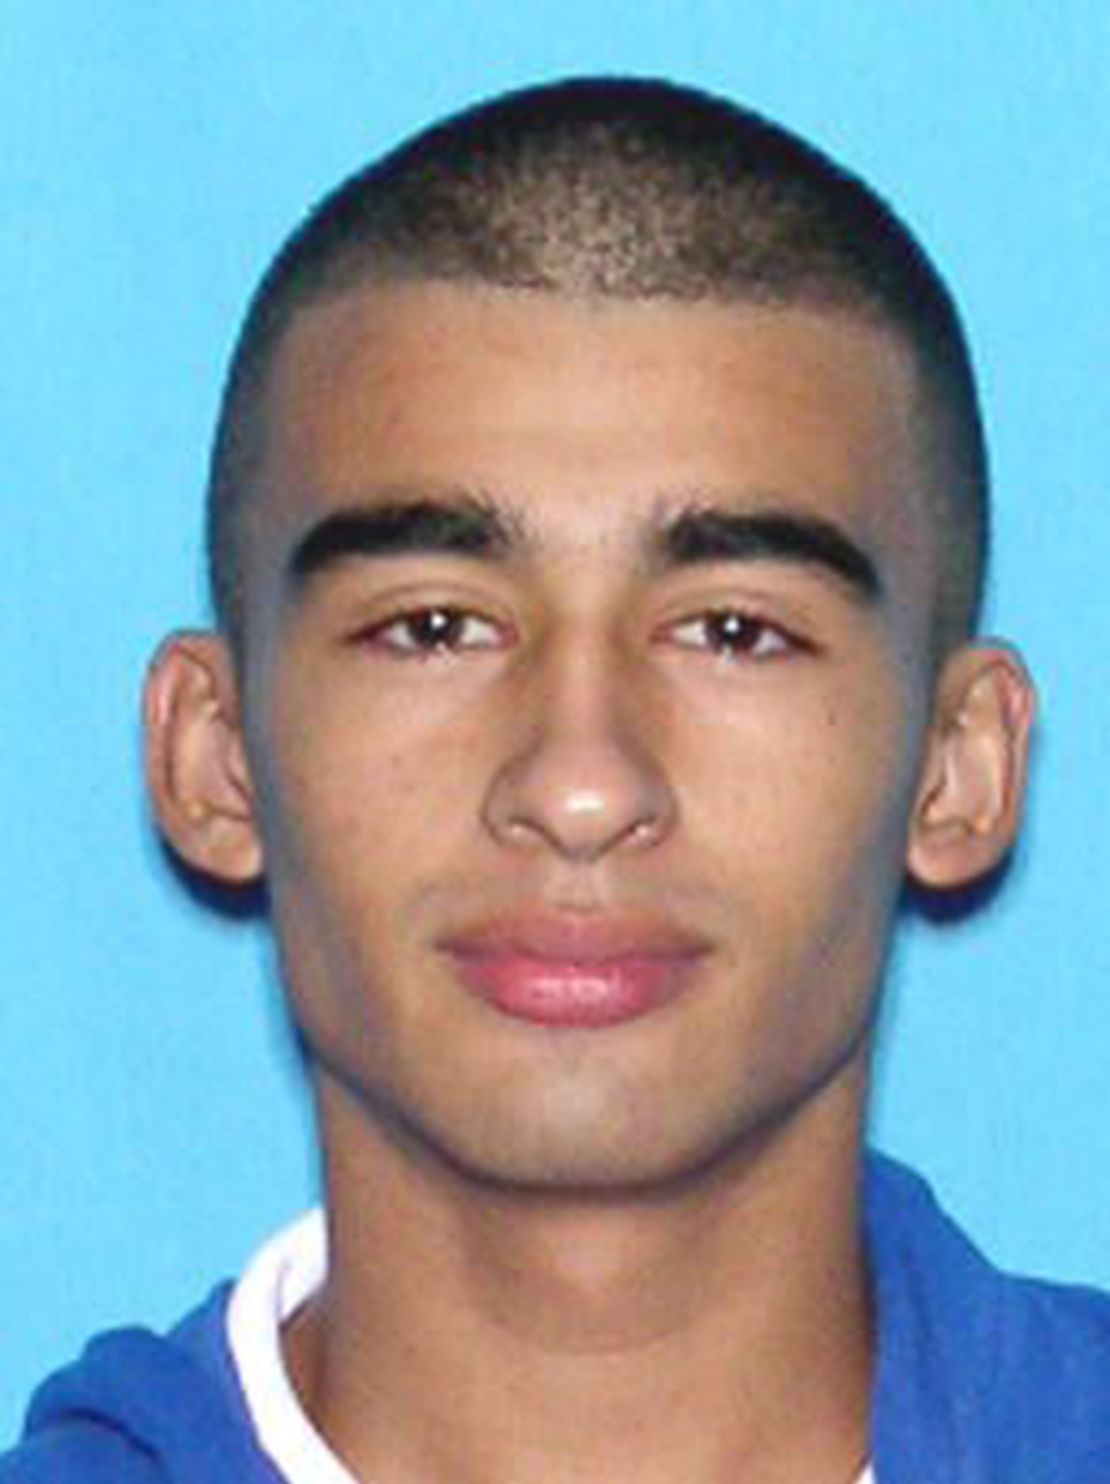 University of Florida student Christian Aguilar, 18, went missing after an altercation in Gainesville.